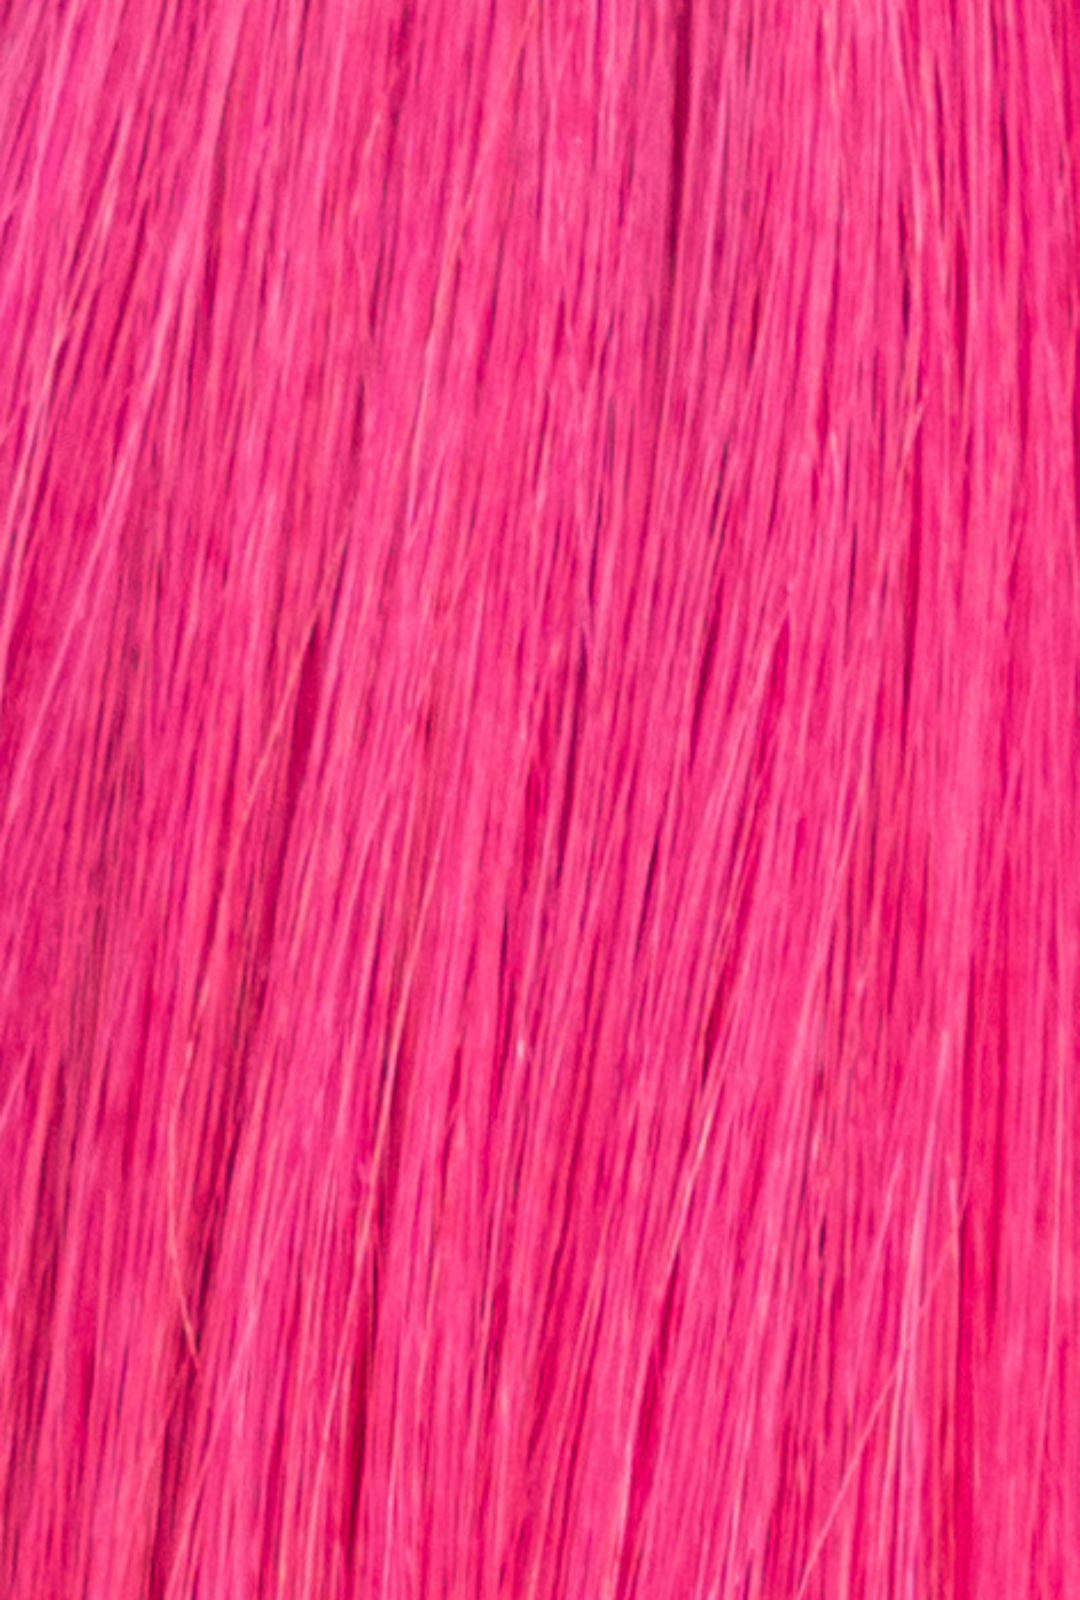 Laced Hair Tape-In Extensions Fuchsia